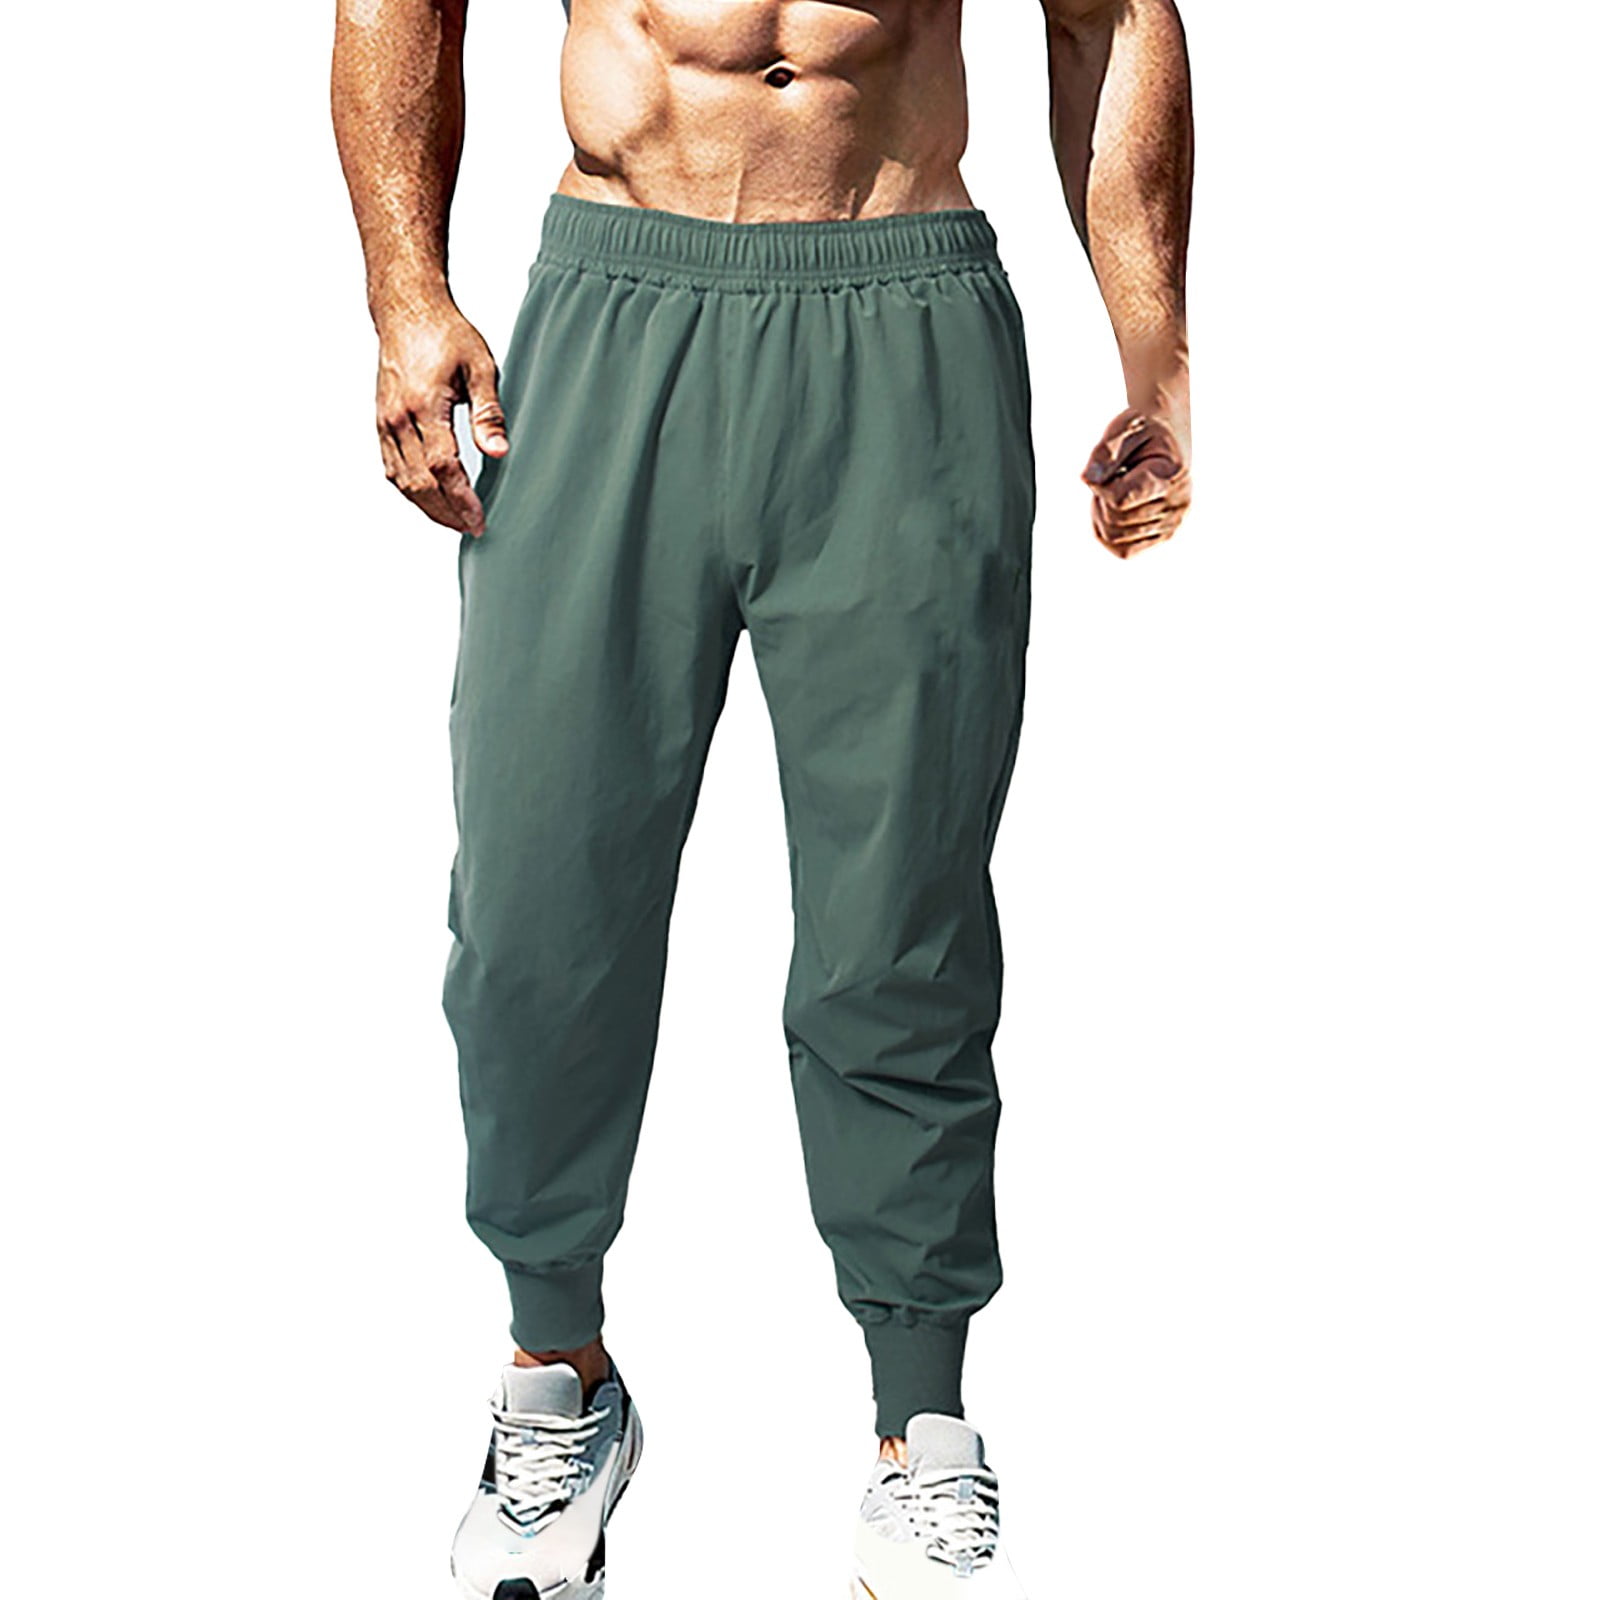 Mens Pants Plain Smooth Loose Sports Fitness Summer Slim Loose Quick Drying Running  Training Leisure Trousers Outwear Soft Fashion Male Pants 